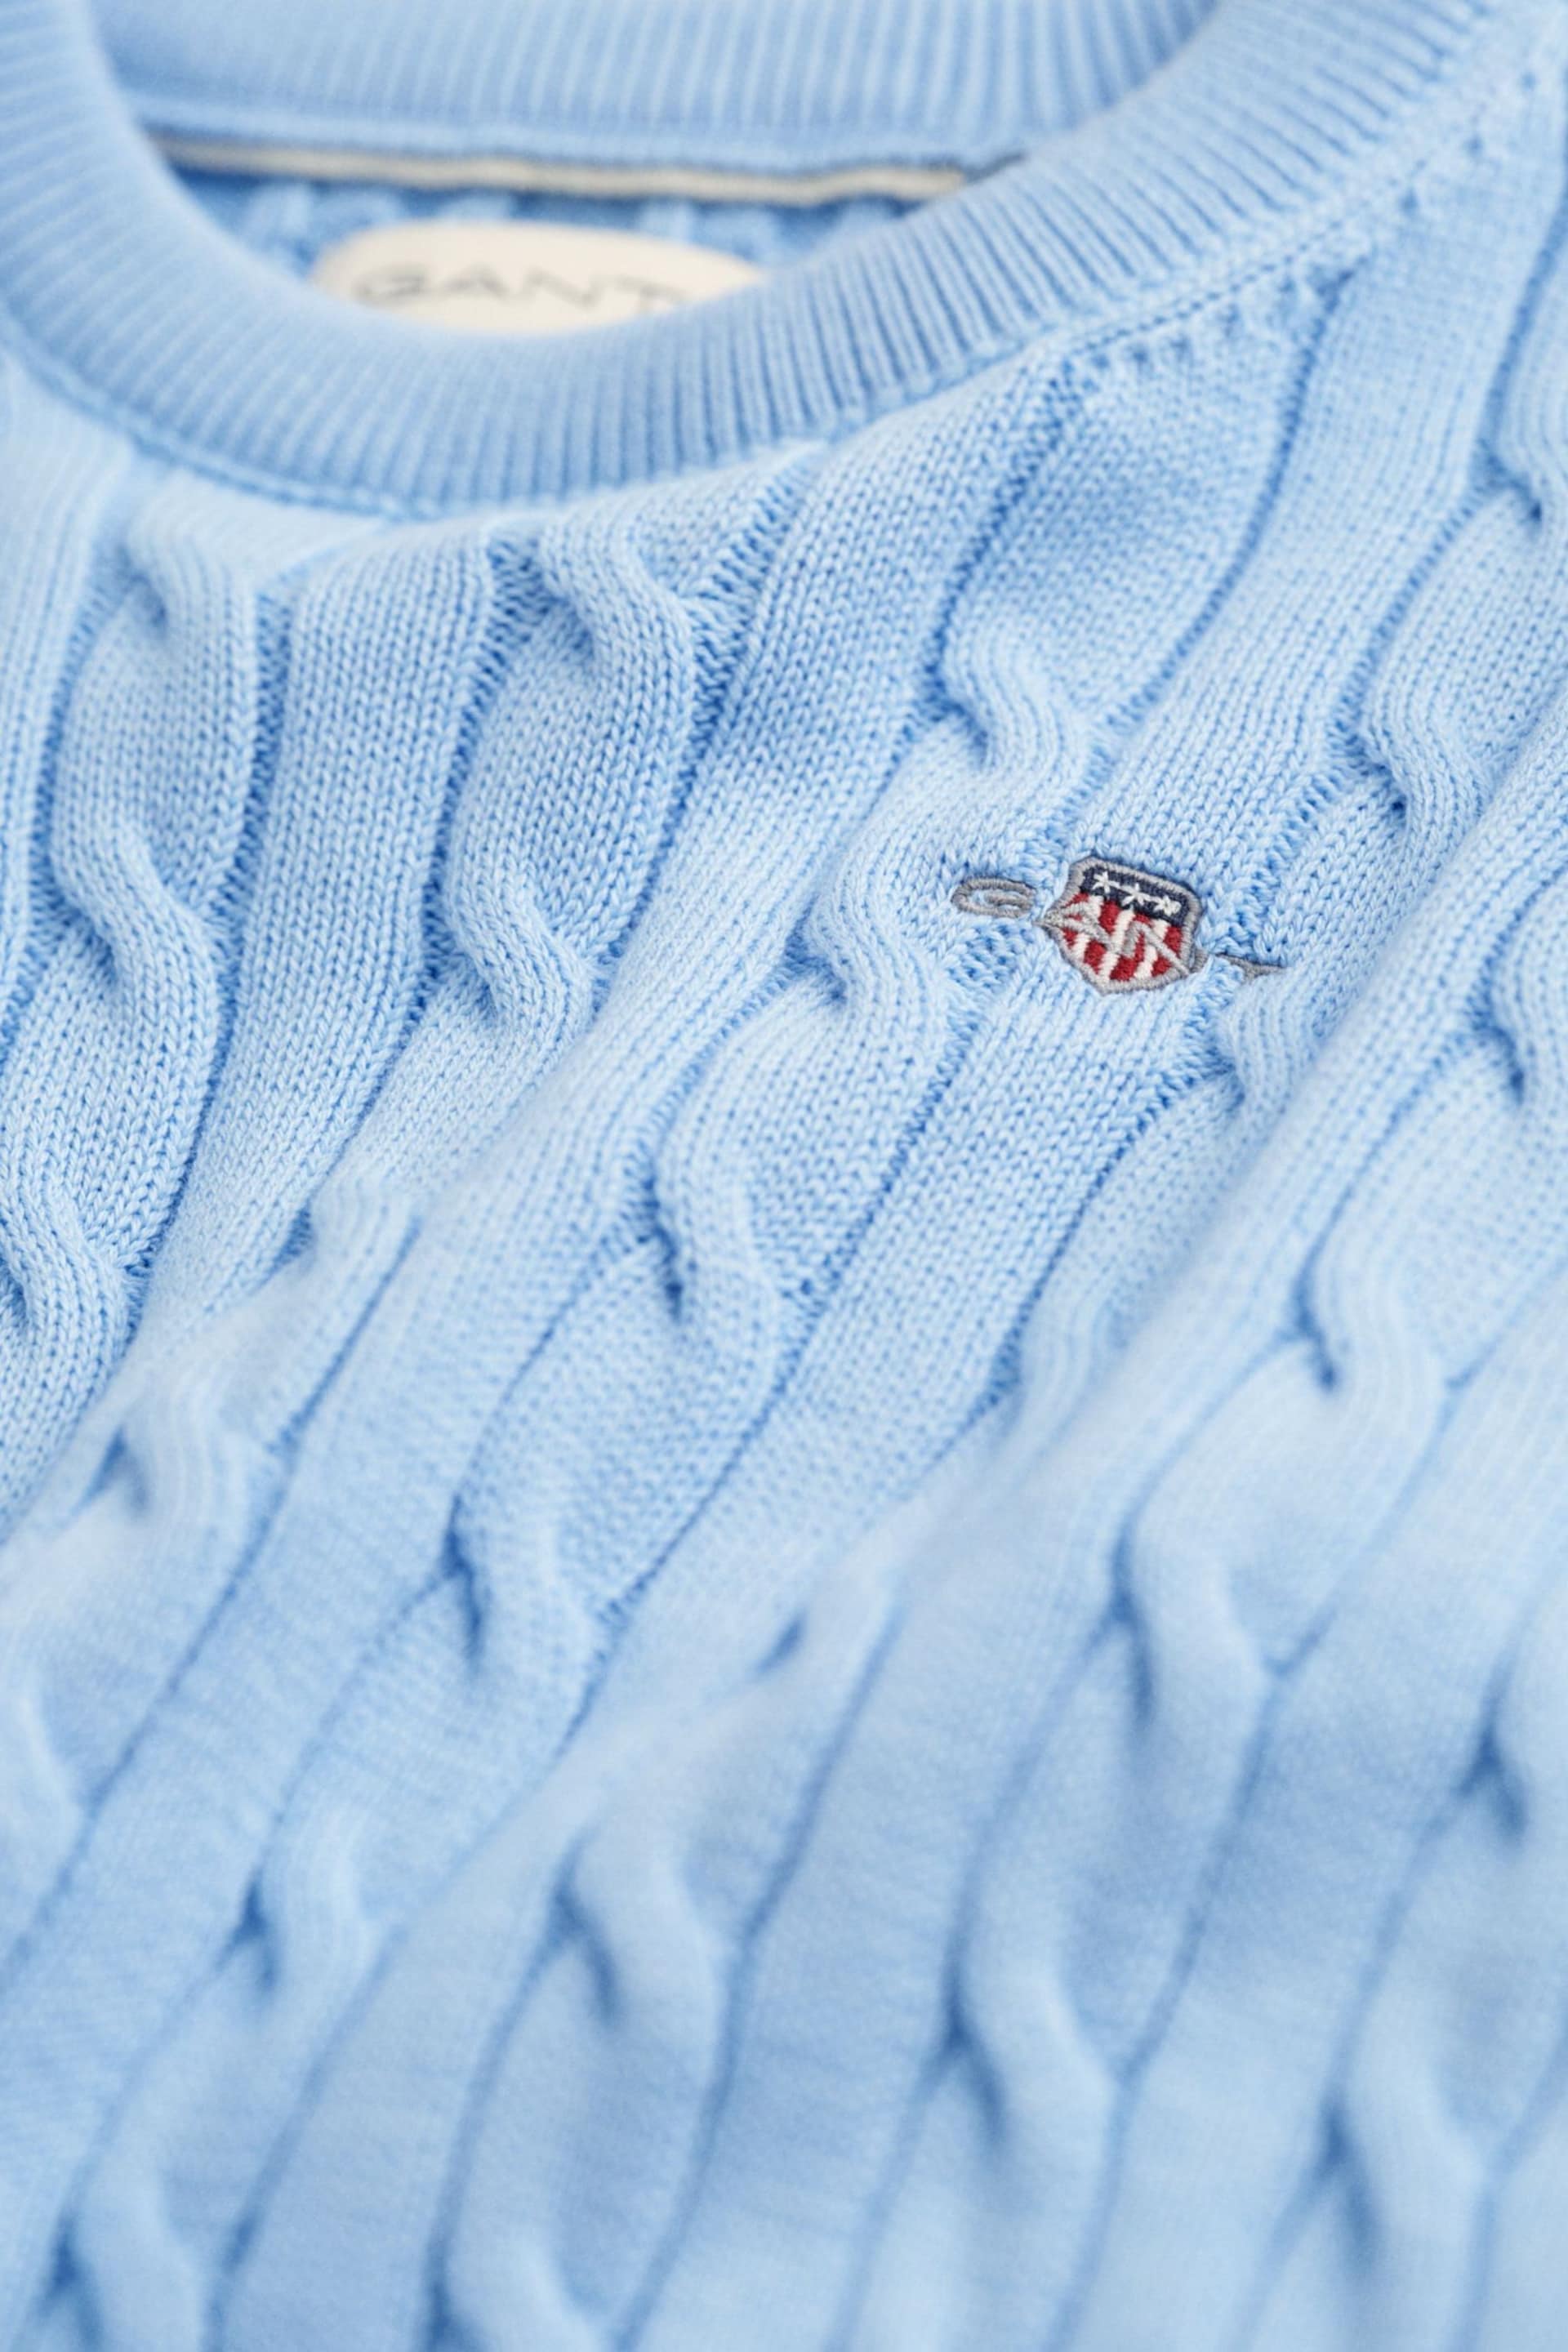 GANT Kids Shield Cotton Cable Knit Crew Neck Sweater - Image 6 of 6